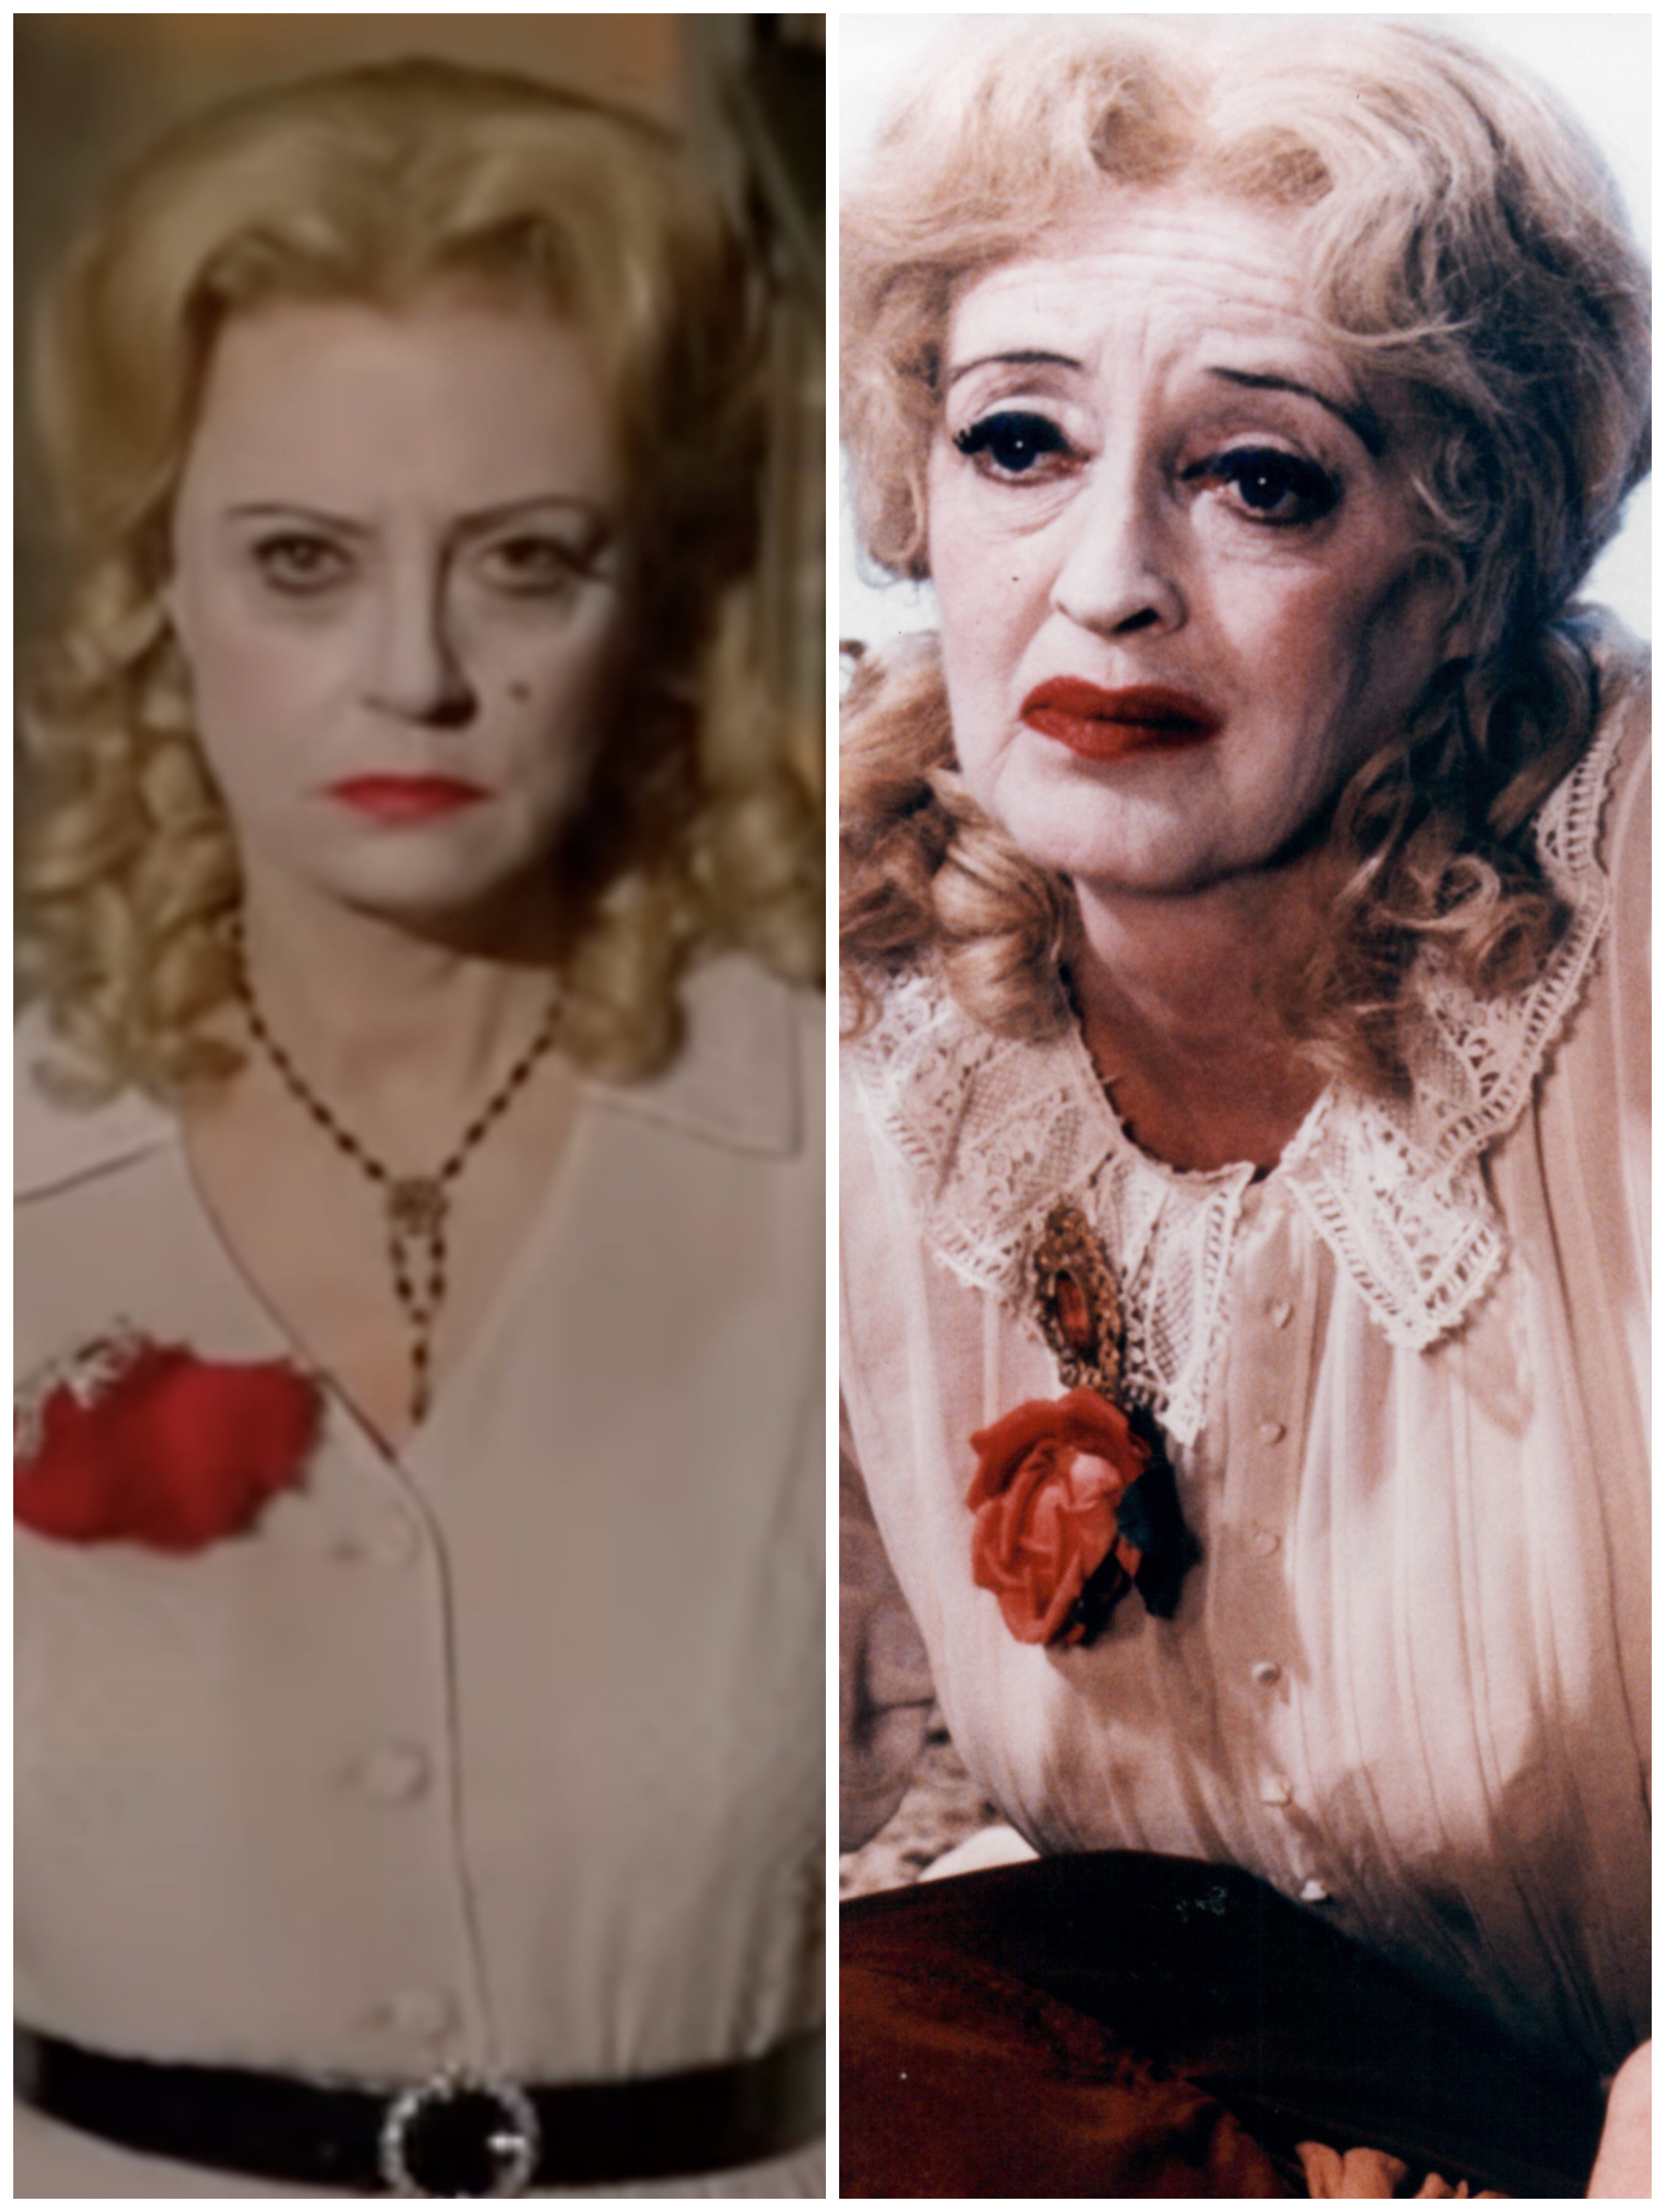 Susan Sarandon in &quot;Feud: Bette and Joan&quot; vs. the real Bette Davis